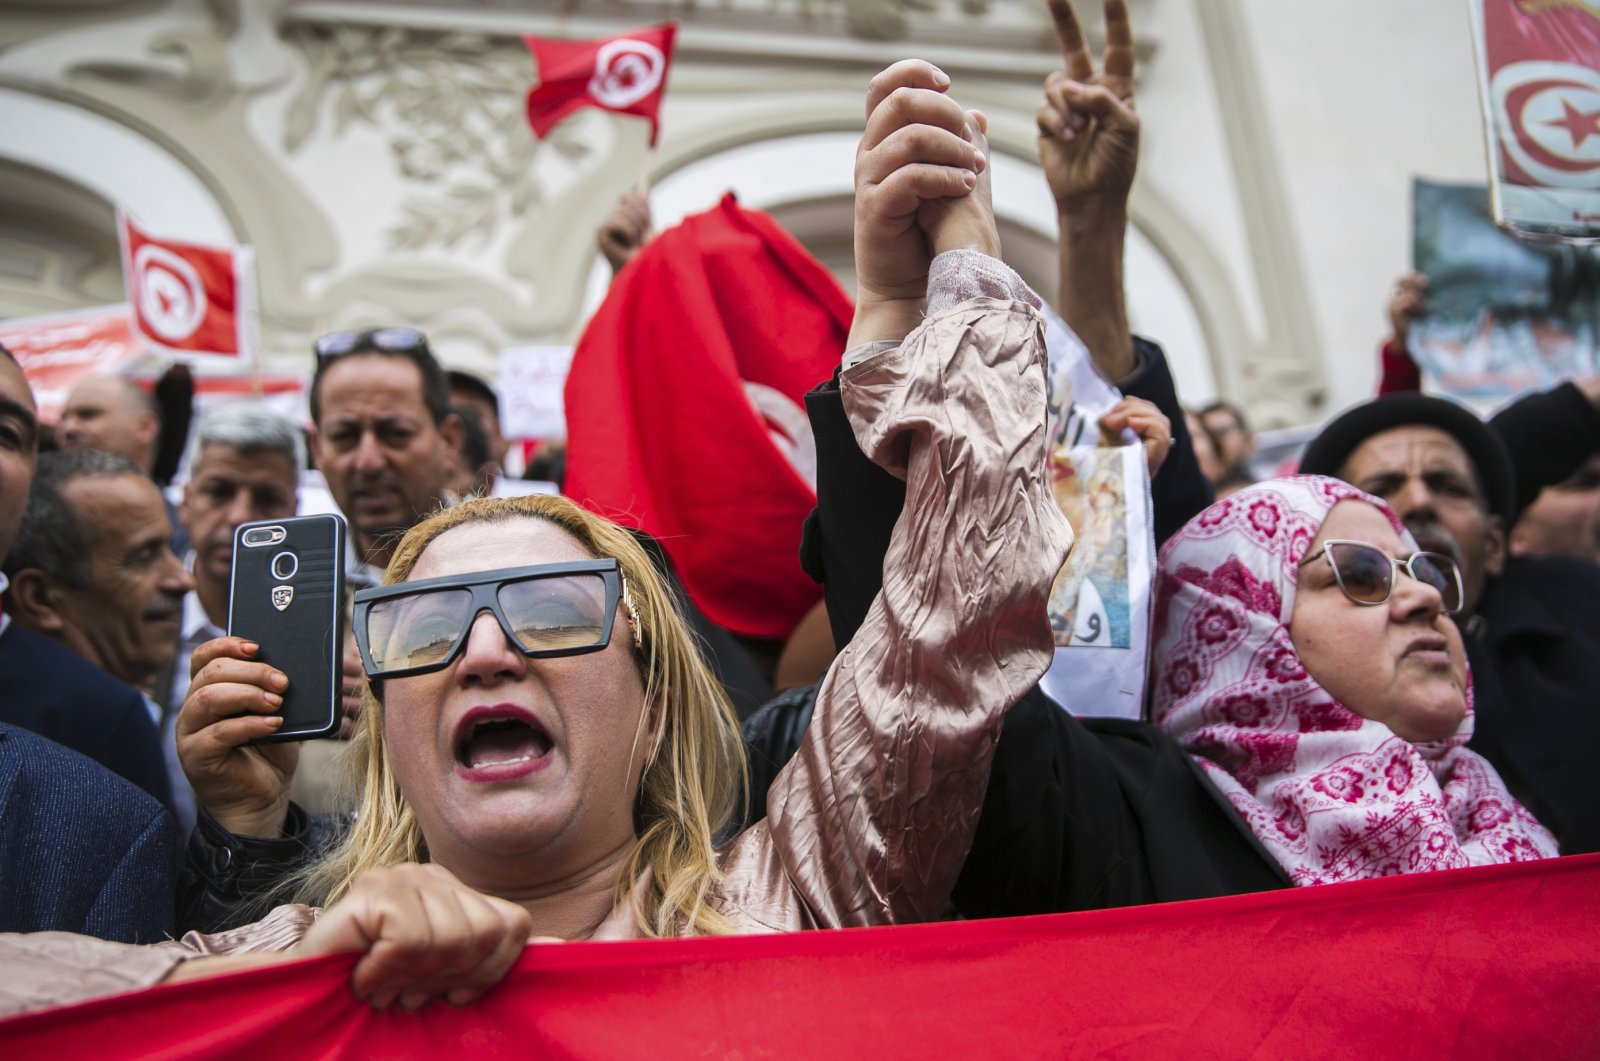 Tunisian demonstrators shout slogans during a rally in support of Tunisian President Kais Saied in Tunis, Tunisia, May 8, 2022. (AP Photo)